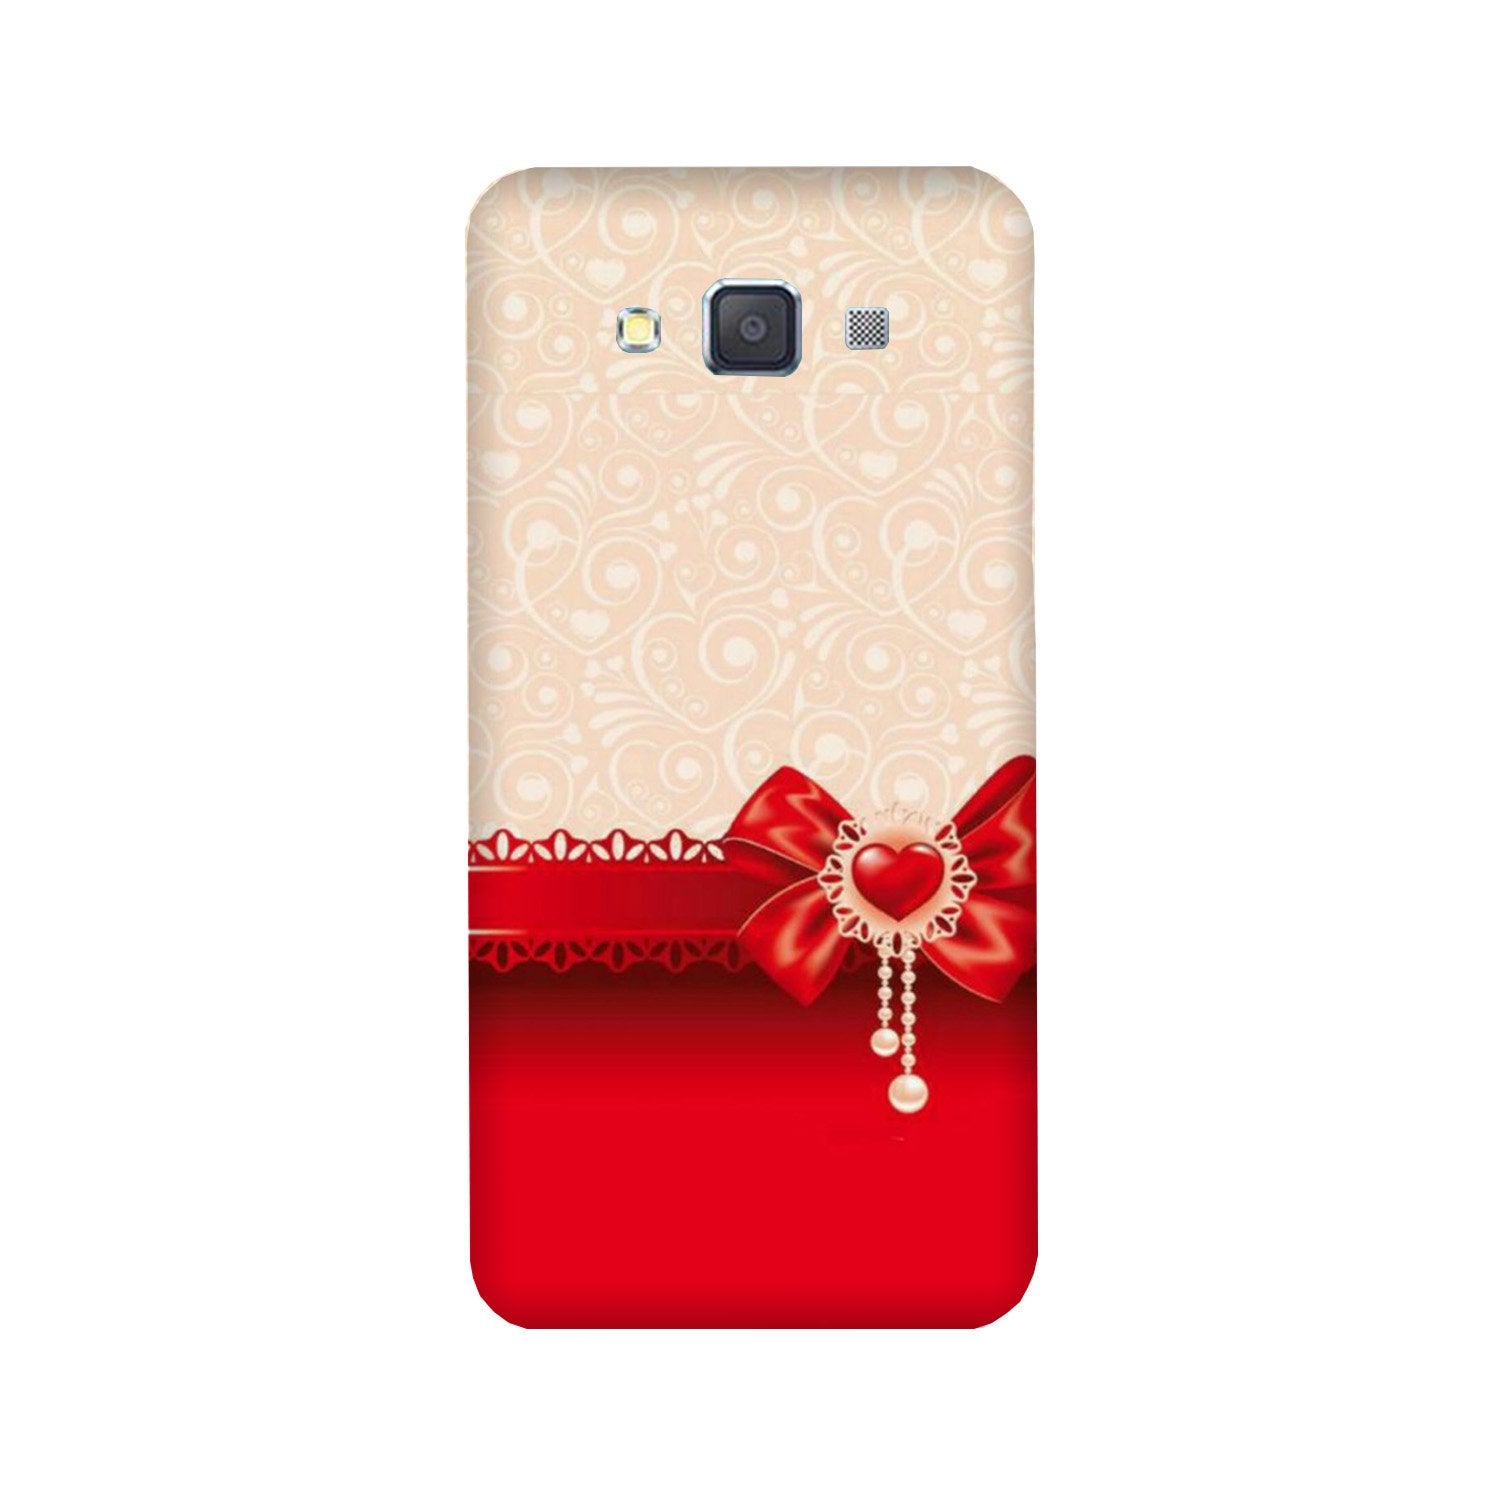 Gift Wrap3 Case for Galaxy ON7/ON7 Pro